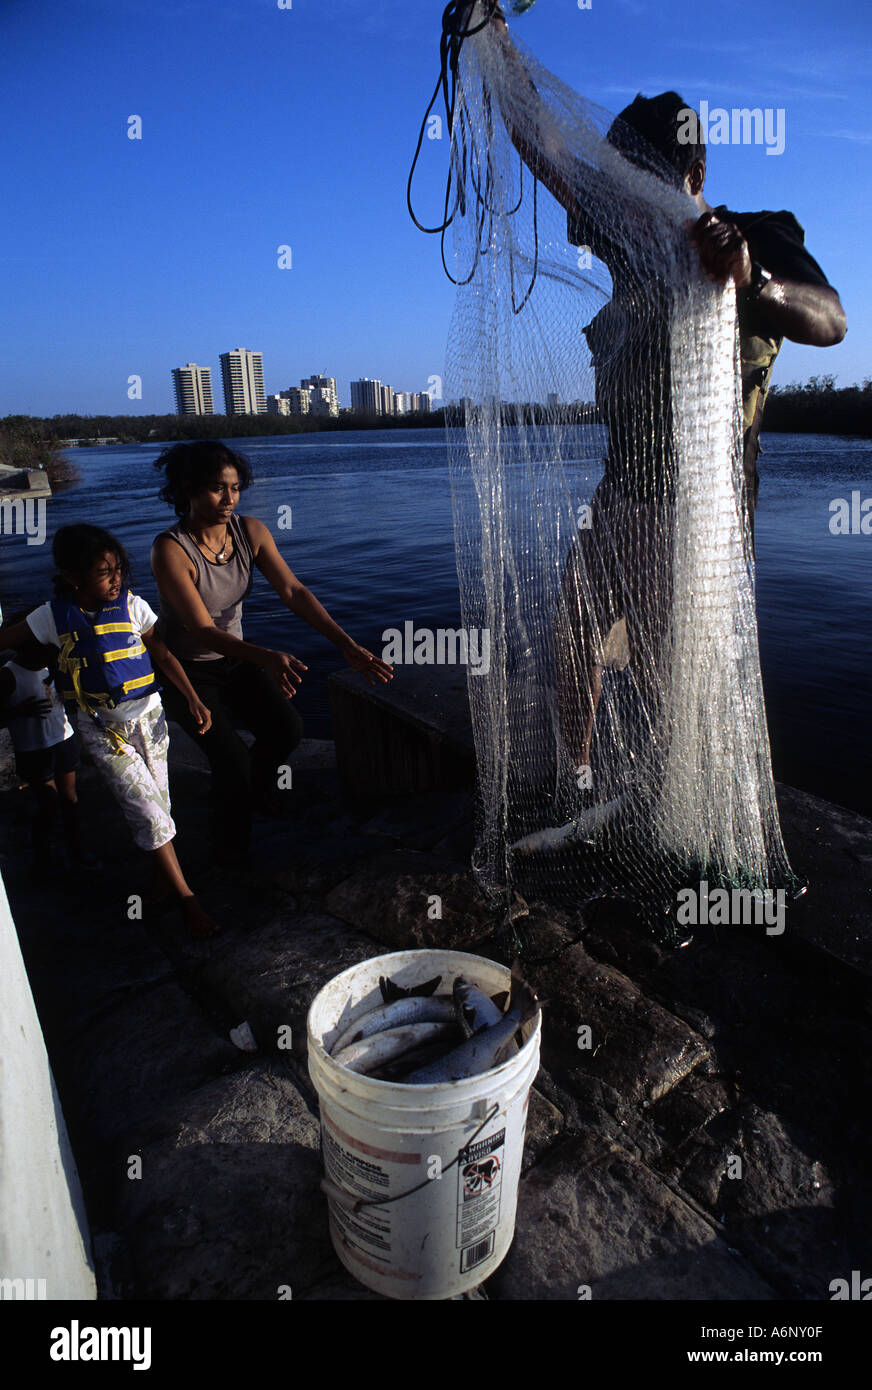 Immigrant family using castnet to catch food fish mullet in